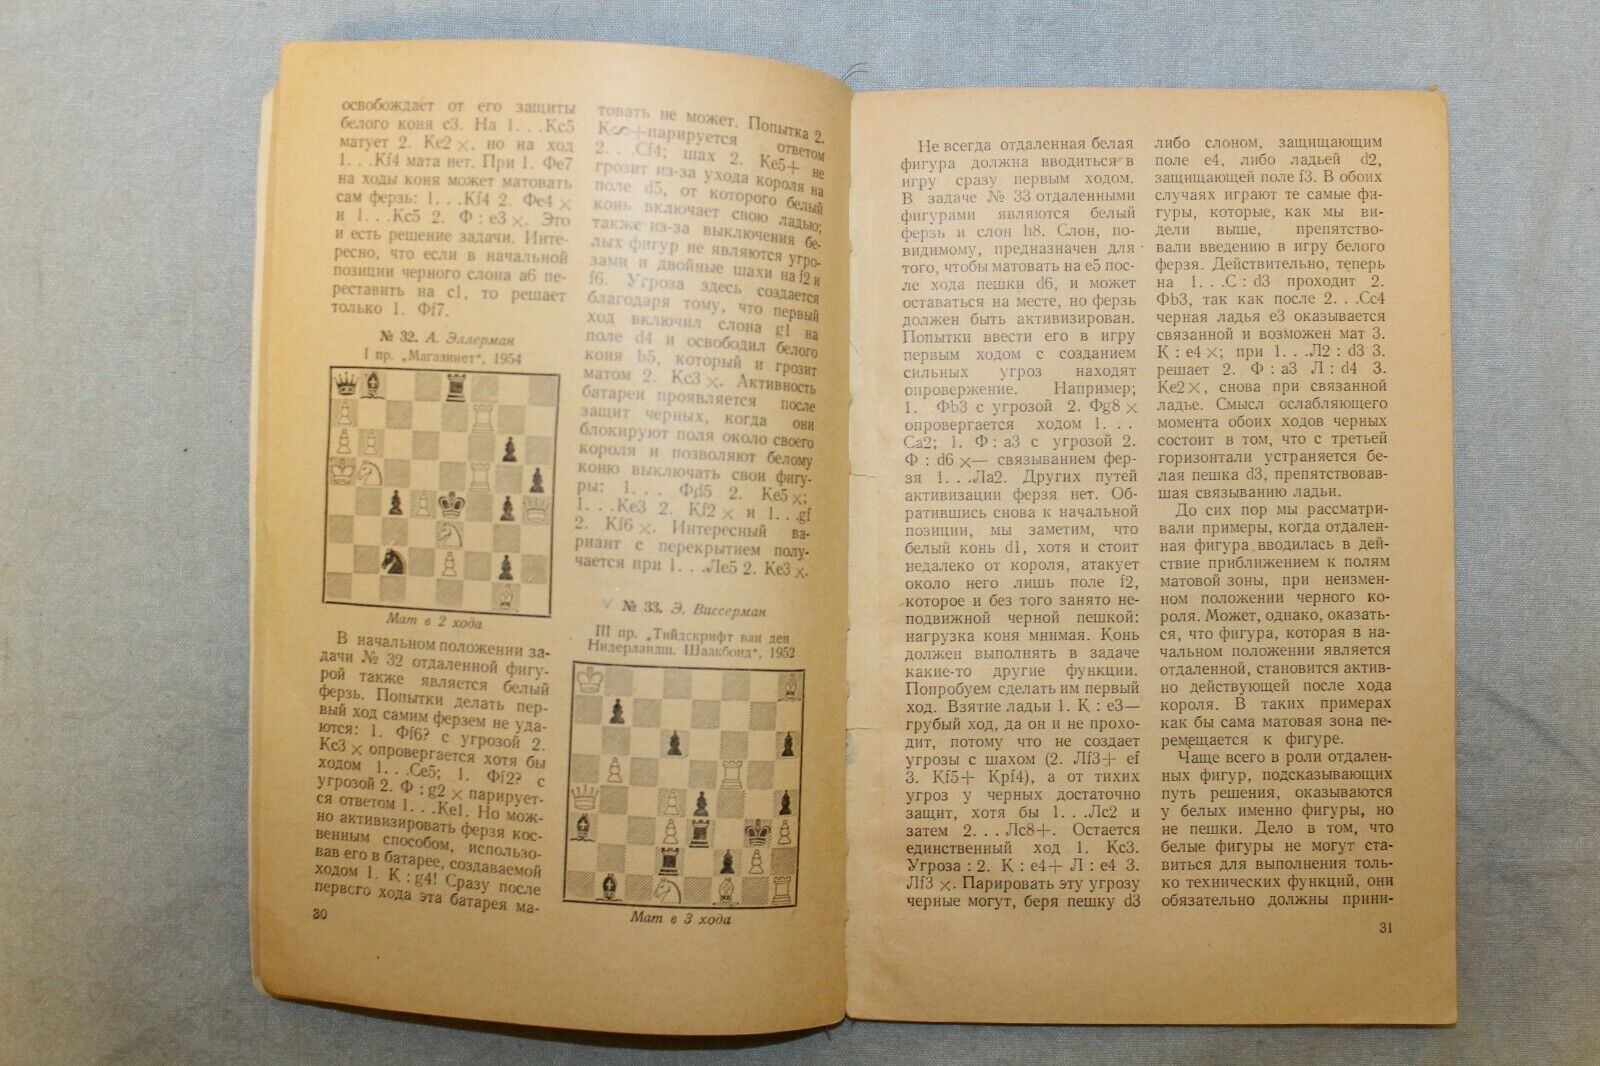 11026.Chess Book signed by Y.Umnov to Zvorykina. Solution of Chess Tasks. 1958